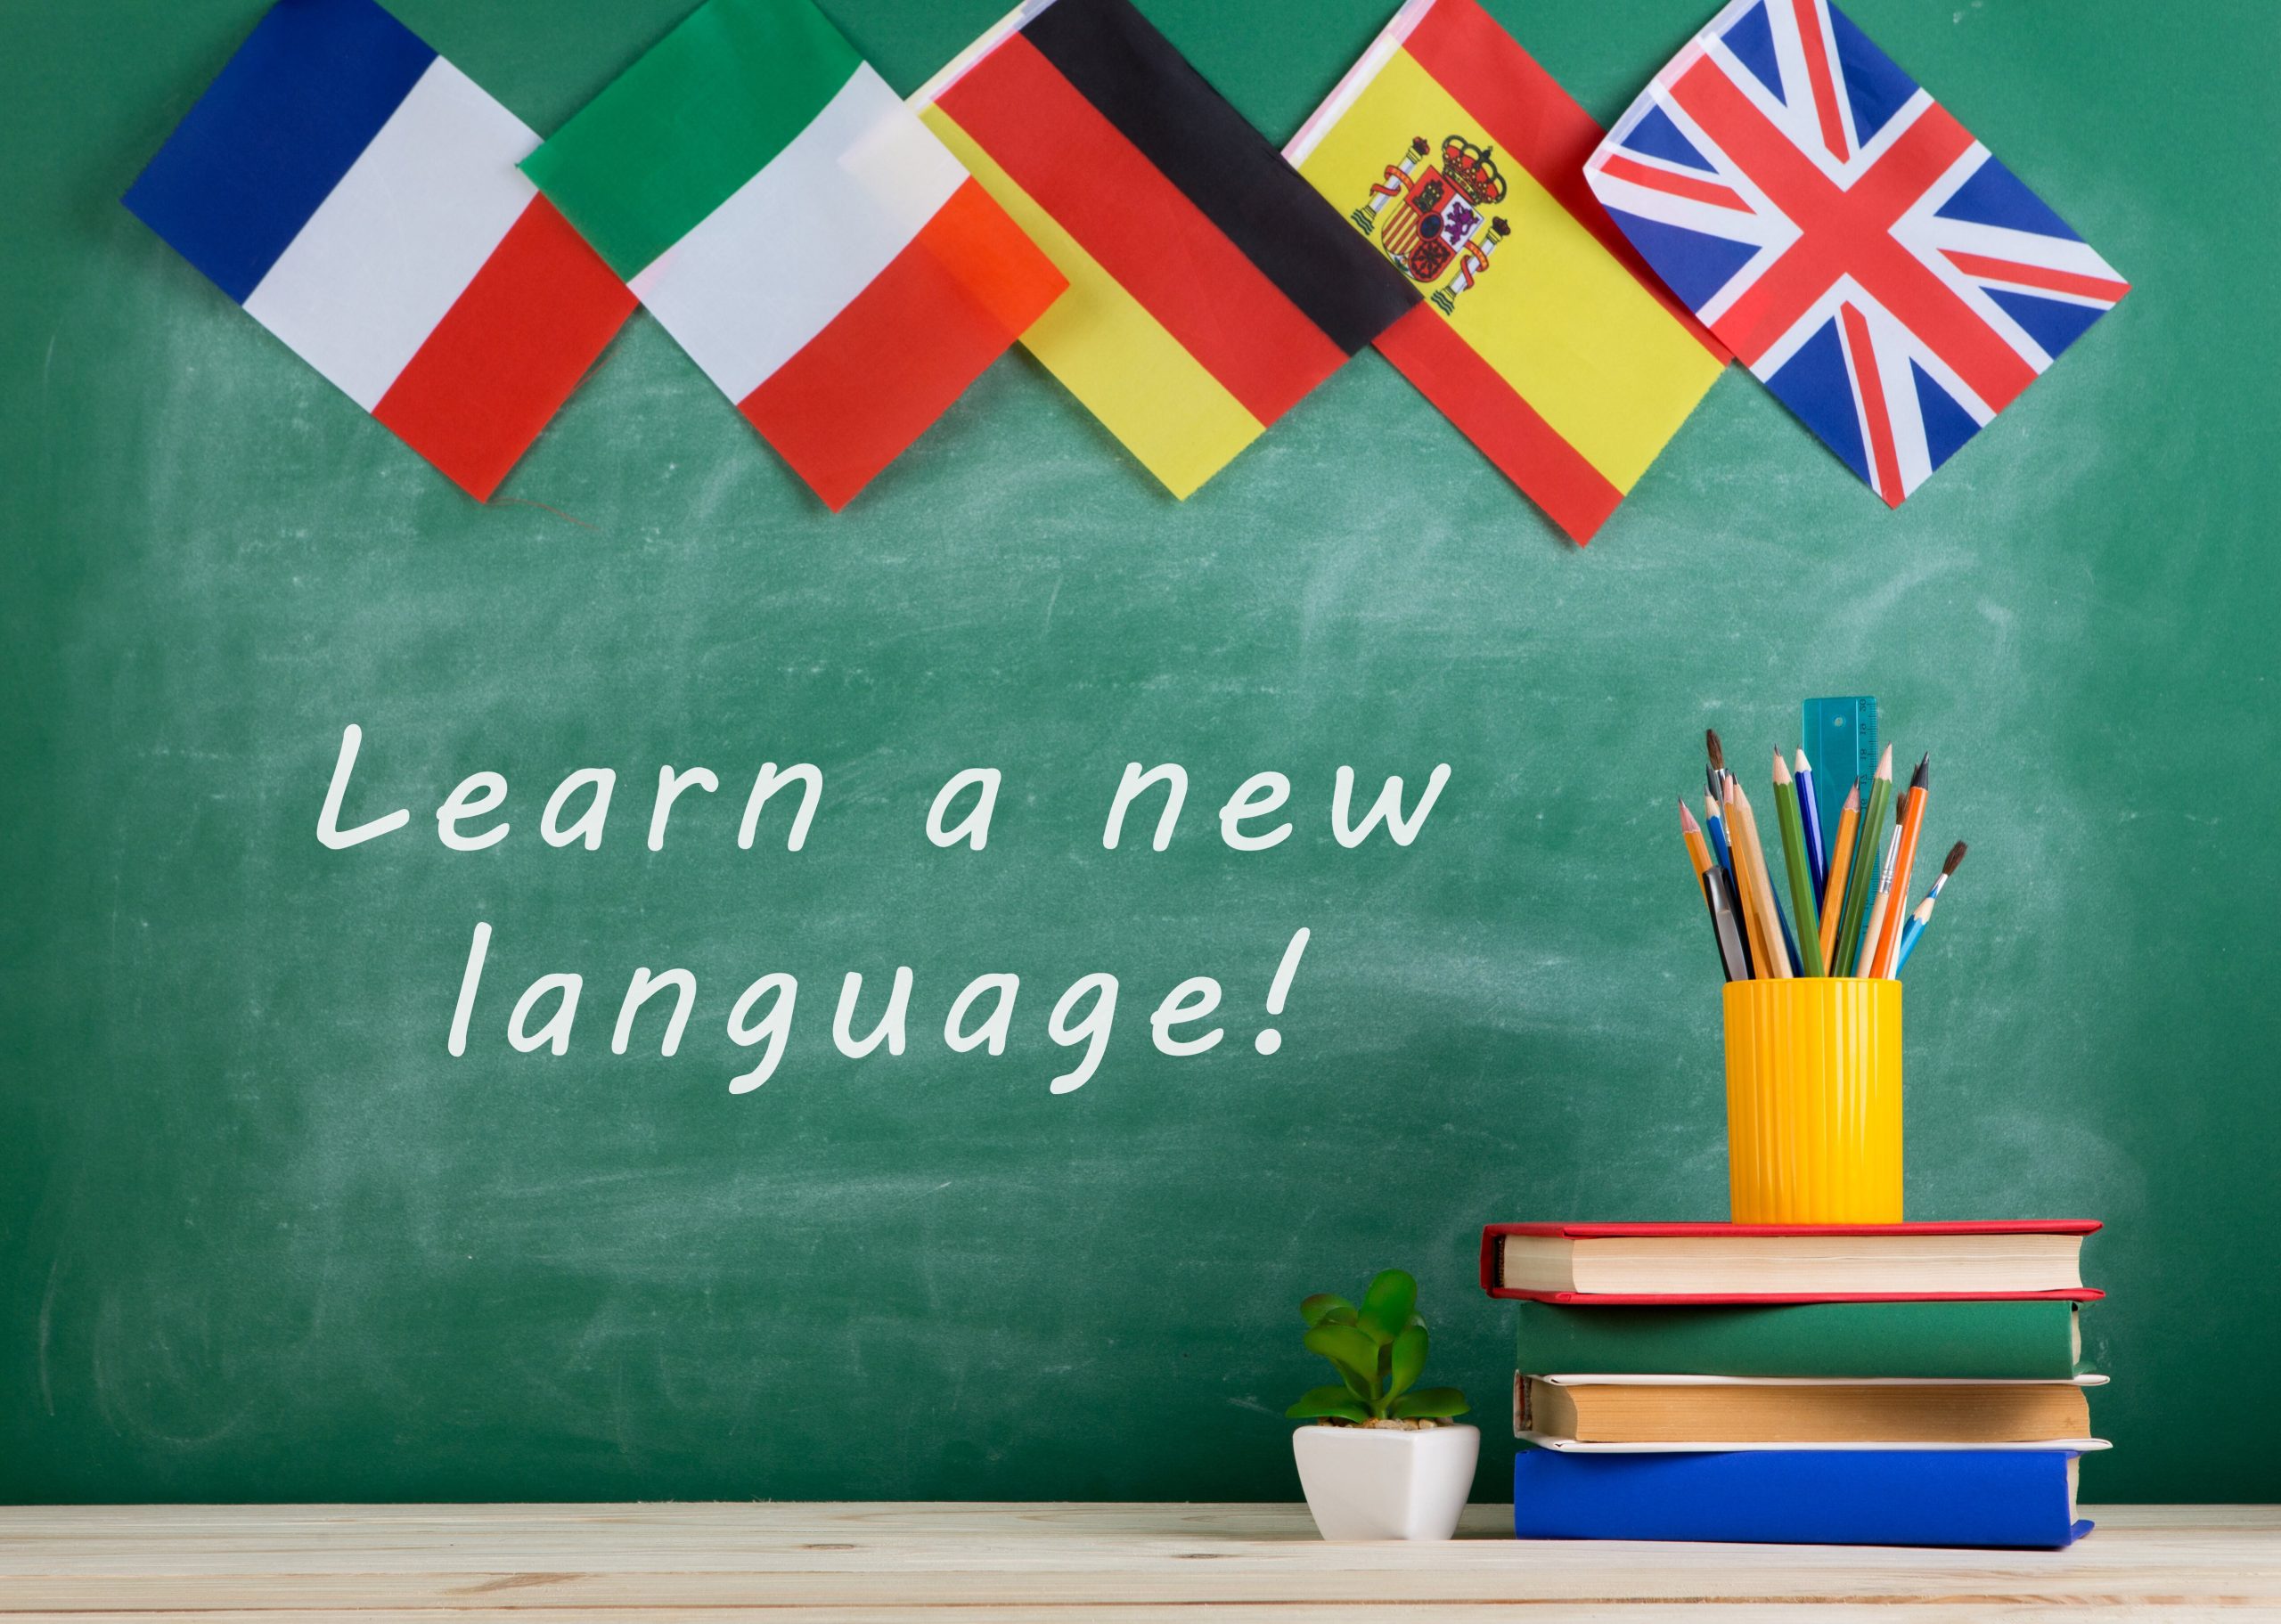 flags-spain-france-great-britain-other-countries-blackboard-with-text-learn-new-language (1)